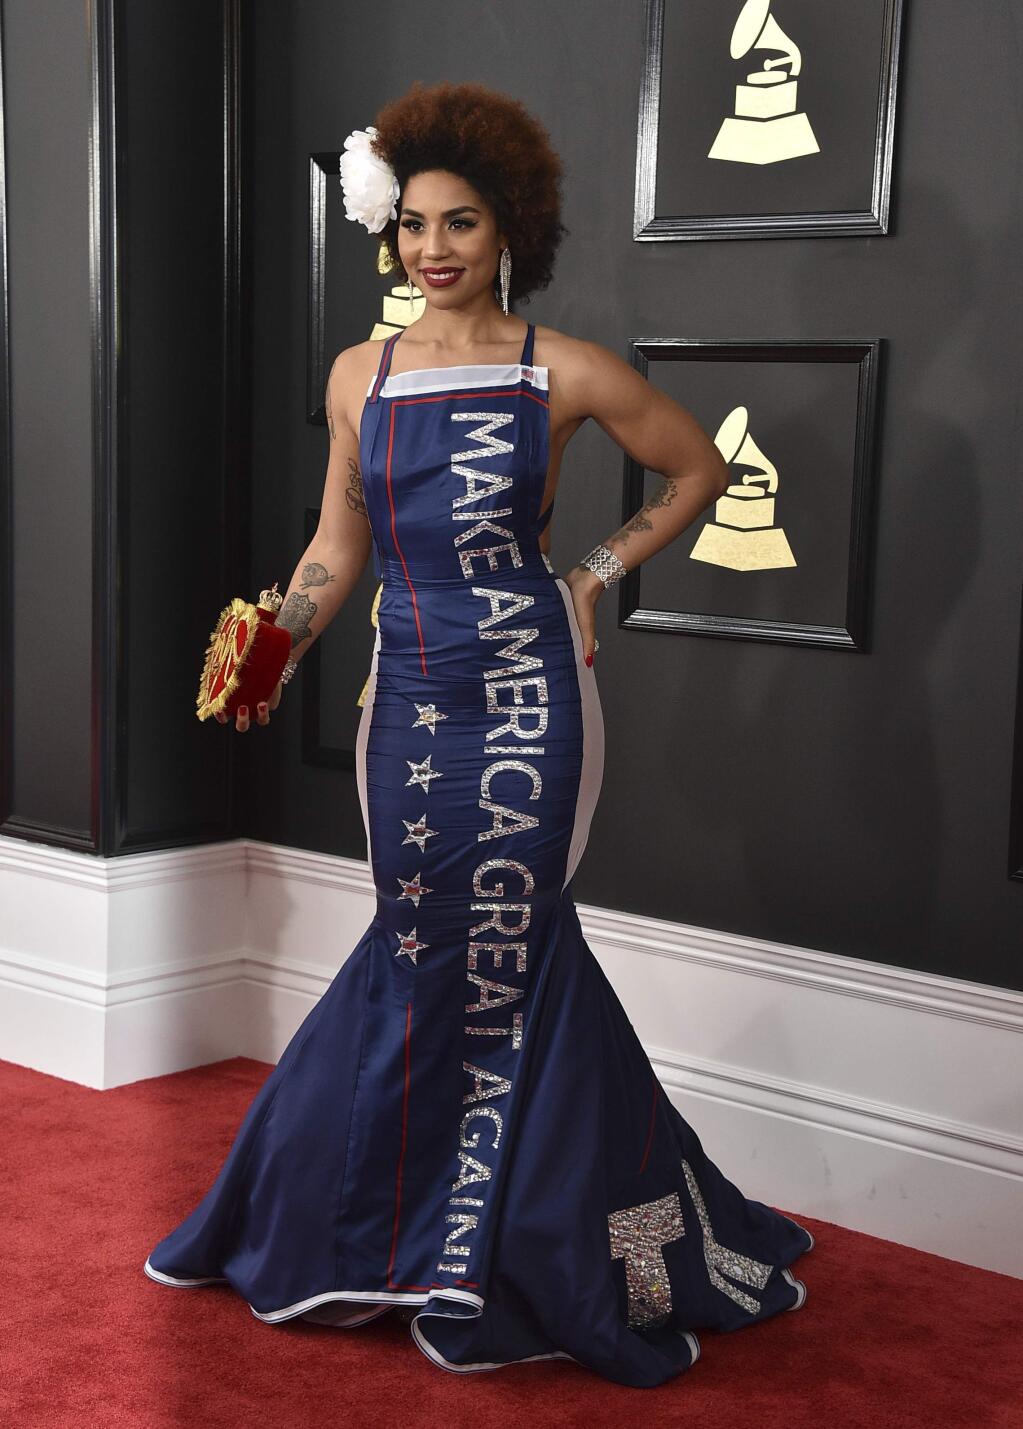 Joy Villa wears a gown that says 'Make America Great Again' at the 59th annual Grammy Awards at the Staples Center on Sunday, Feb. 12, 2017, in Los Angeles. (Photo by Jordan Strauss/Invision/AP)